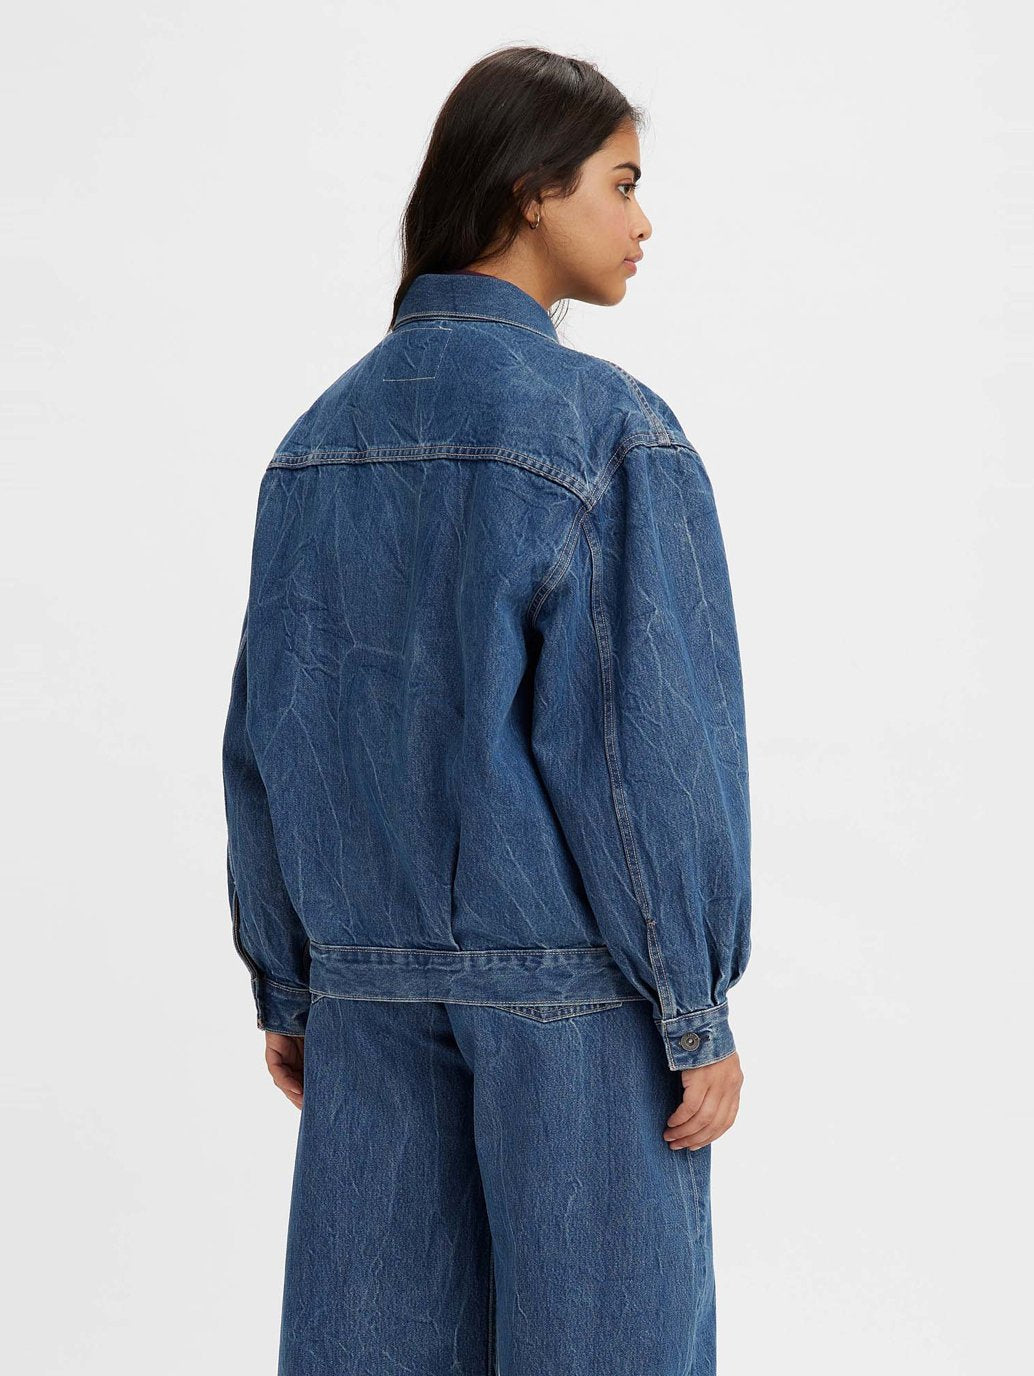 Levi's® Made & Crafted® Women's Tucked Type ii Trucker Jacket